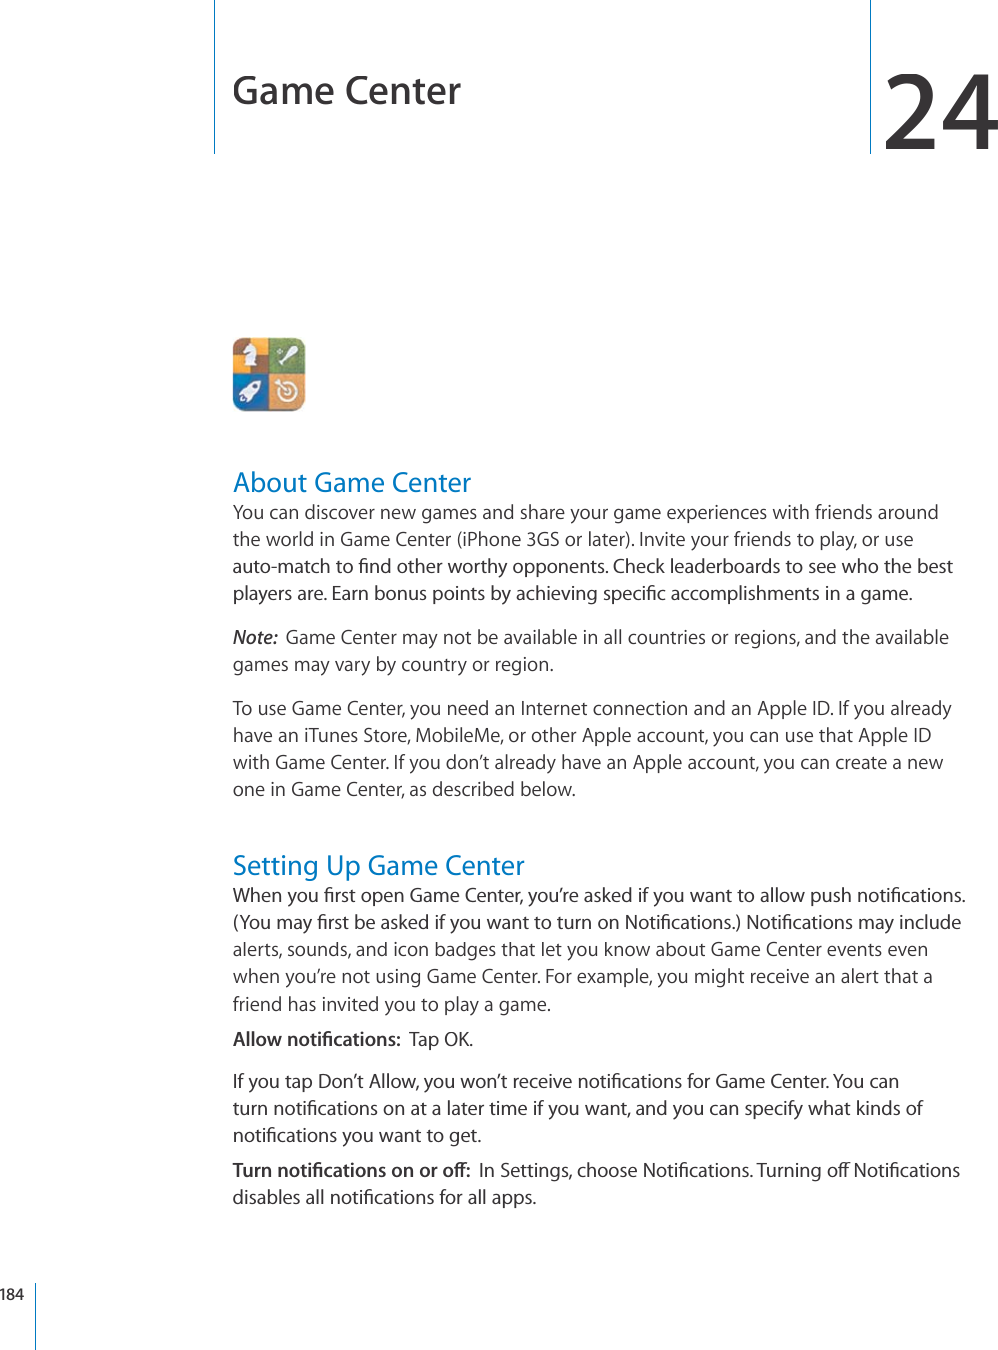 Game Center24About Game CenterYou can discover new games and share your game experiences with friends aroundthe world in Game Center (iPhone3GS or later). Invite your friends to play, or useCWVQOCVEJVQ°PFQVJGTYQTVJ[QRRQPGPVU%JGEMNGCFGTDQCTFUVQUGGYJQVJGDGUVRNC[GTUCTG&apos;CTPDQPWURQKPVUD[CEJKGXKPIURGEK°ECEEQORNKUJOGPVUKPCICOGNote:Game Center may not be available in all countries or regions, and the availablegames may vary by country or region.To use Game Center, you need an Internet connection and an Apple ID. If you alreadyhave an iTunes Store, MobileMe, or other Apple account, you can use that Apple IDwith Game Center. If you don’t already have an Apple account, you can create a newone in Game Center, as described below.Setting Up Game Center9JGP[QW°TUVQRGP)COG%GPVGT[QW¨TGCUMGFKH[QWYCPVVQCNNQYRWUJPQVK°ECVKQPU;QWOC[°TUVDGCUMGFKH[QWYCPVVQVWTPQP0QVK°ECVKQPU0QVK°ECVKQPUOC[KPENWFGalerts, sounds, and icon badges that let you know about Game Center events evenwhen you’re not using Game Center. For example, you might receive an alert that afriend has invited you to play a game. #NNQYPQVK°ECVKQPU6CR1-+H[QWVCR&amp;QP¨V#NNQY[QWYQP¨VTGEGKXGPQVK°ECVKQPUHQT)COG%GPVGT;QWECPVWTPPQVK°ECVKQPUQPCVCNCVGTVKOGKH[QWYCPVCPF[QWECPURGEKH[YJCVMKPFUQHPQVK°ECVKQPU[QWYCPVVQIGV6WTPPQVK°ECVKQPUQPQTQÒ+P5GVVKPIUEJQQUG0QVK°ECVKQPU6WTPKPIQÒ0QVK°ECVKQPUFKUCDNGUCNNPQVK°ECVKQPUHQTCNNCRRU184